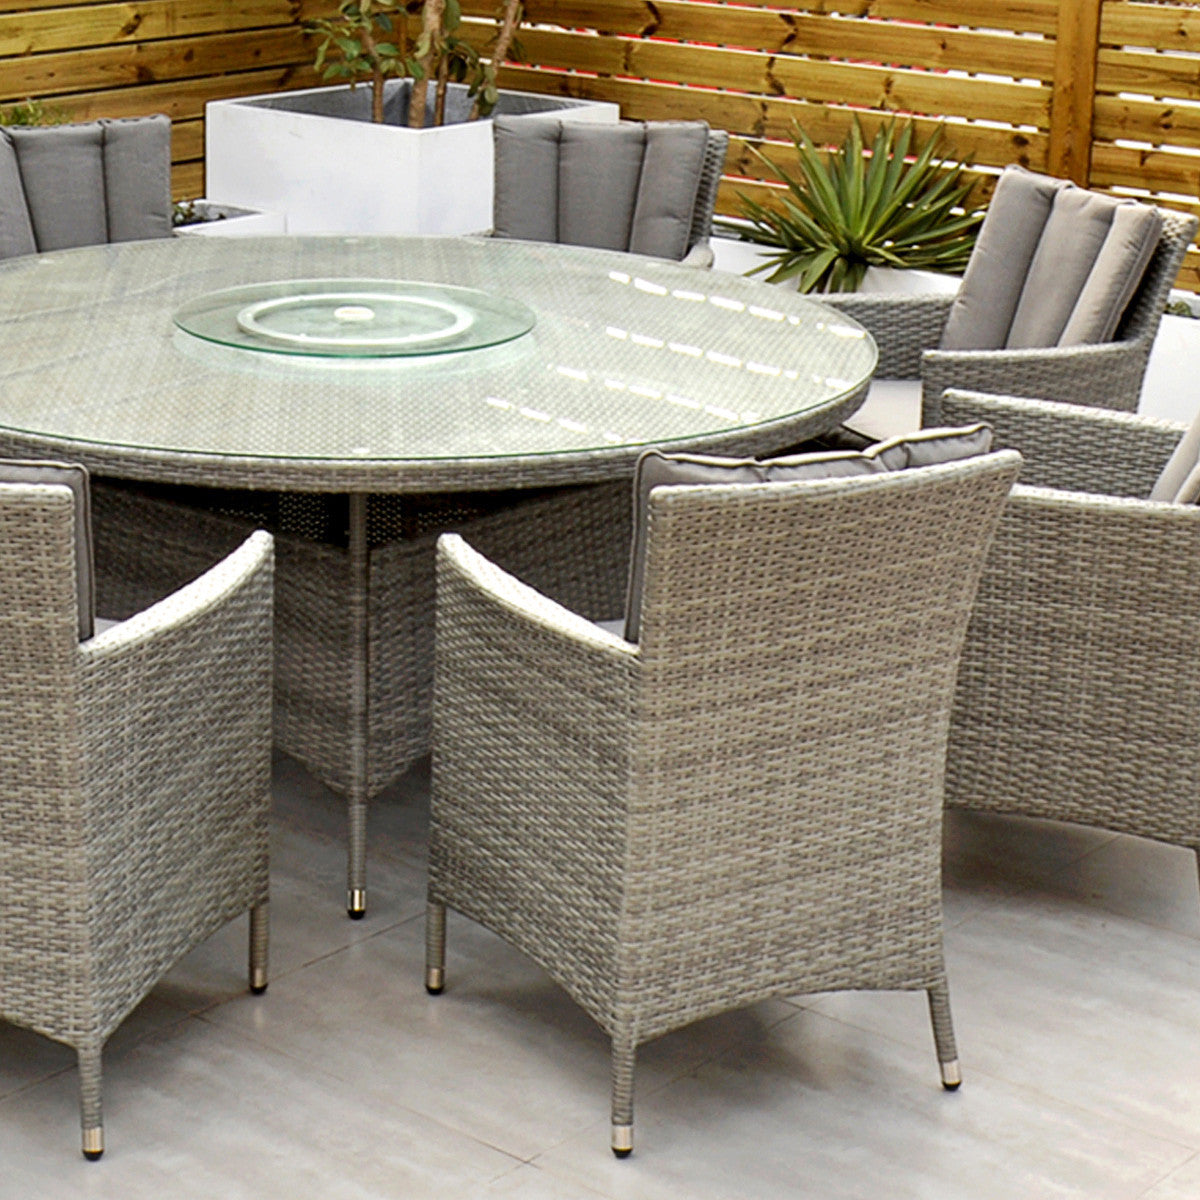 Cuba - 8 Seat Set with 170cm Round Table (Light Grey)